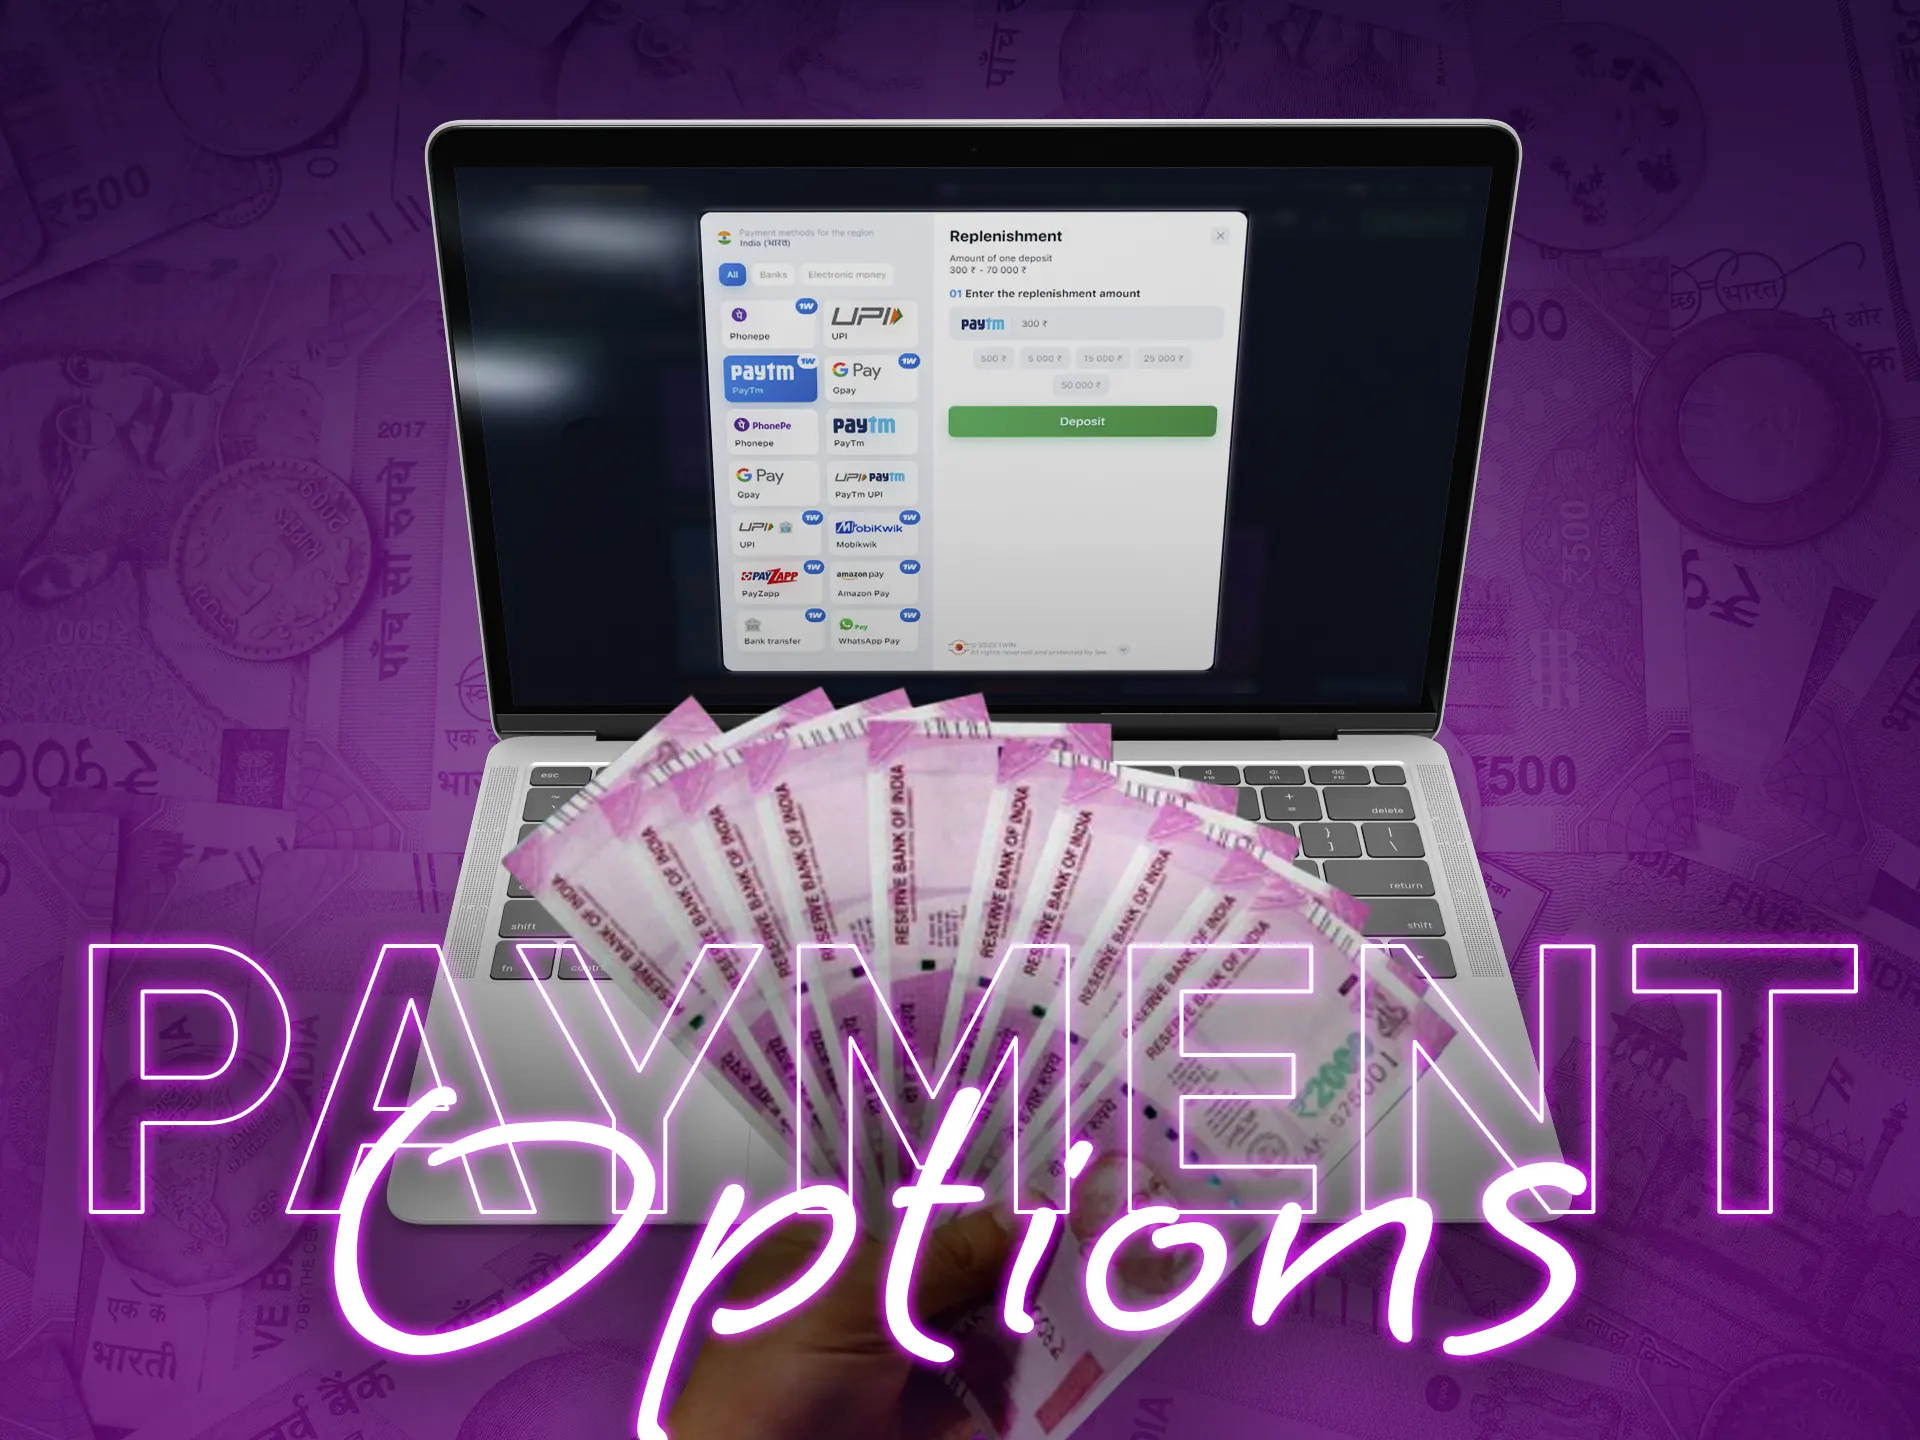 You can use different payment methods to top up your account or withdraw winnings.